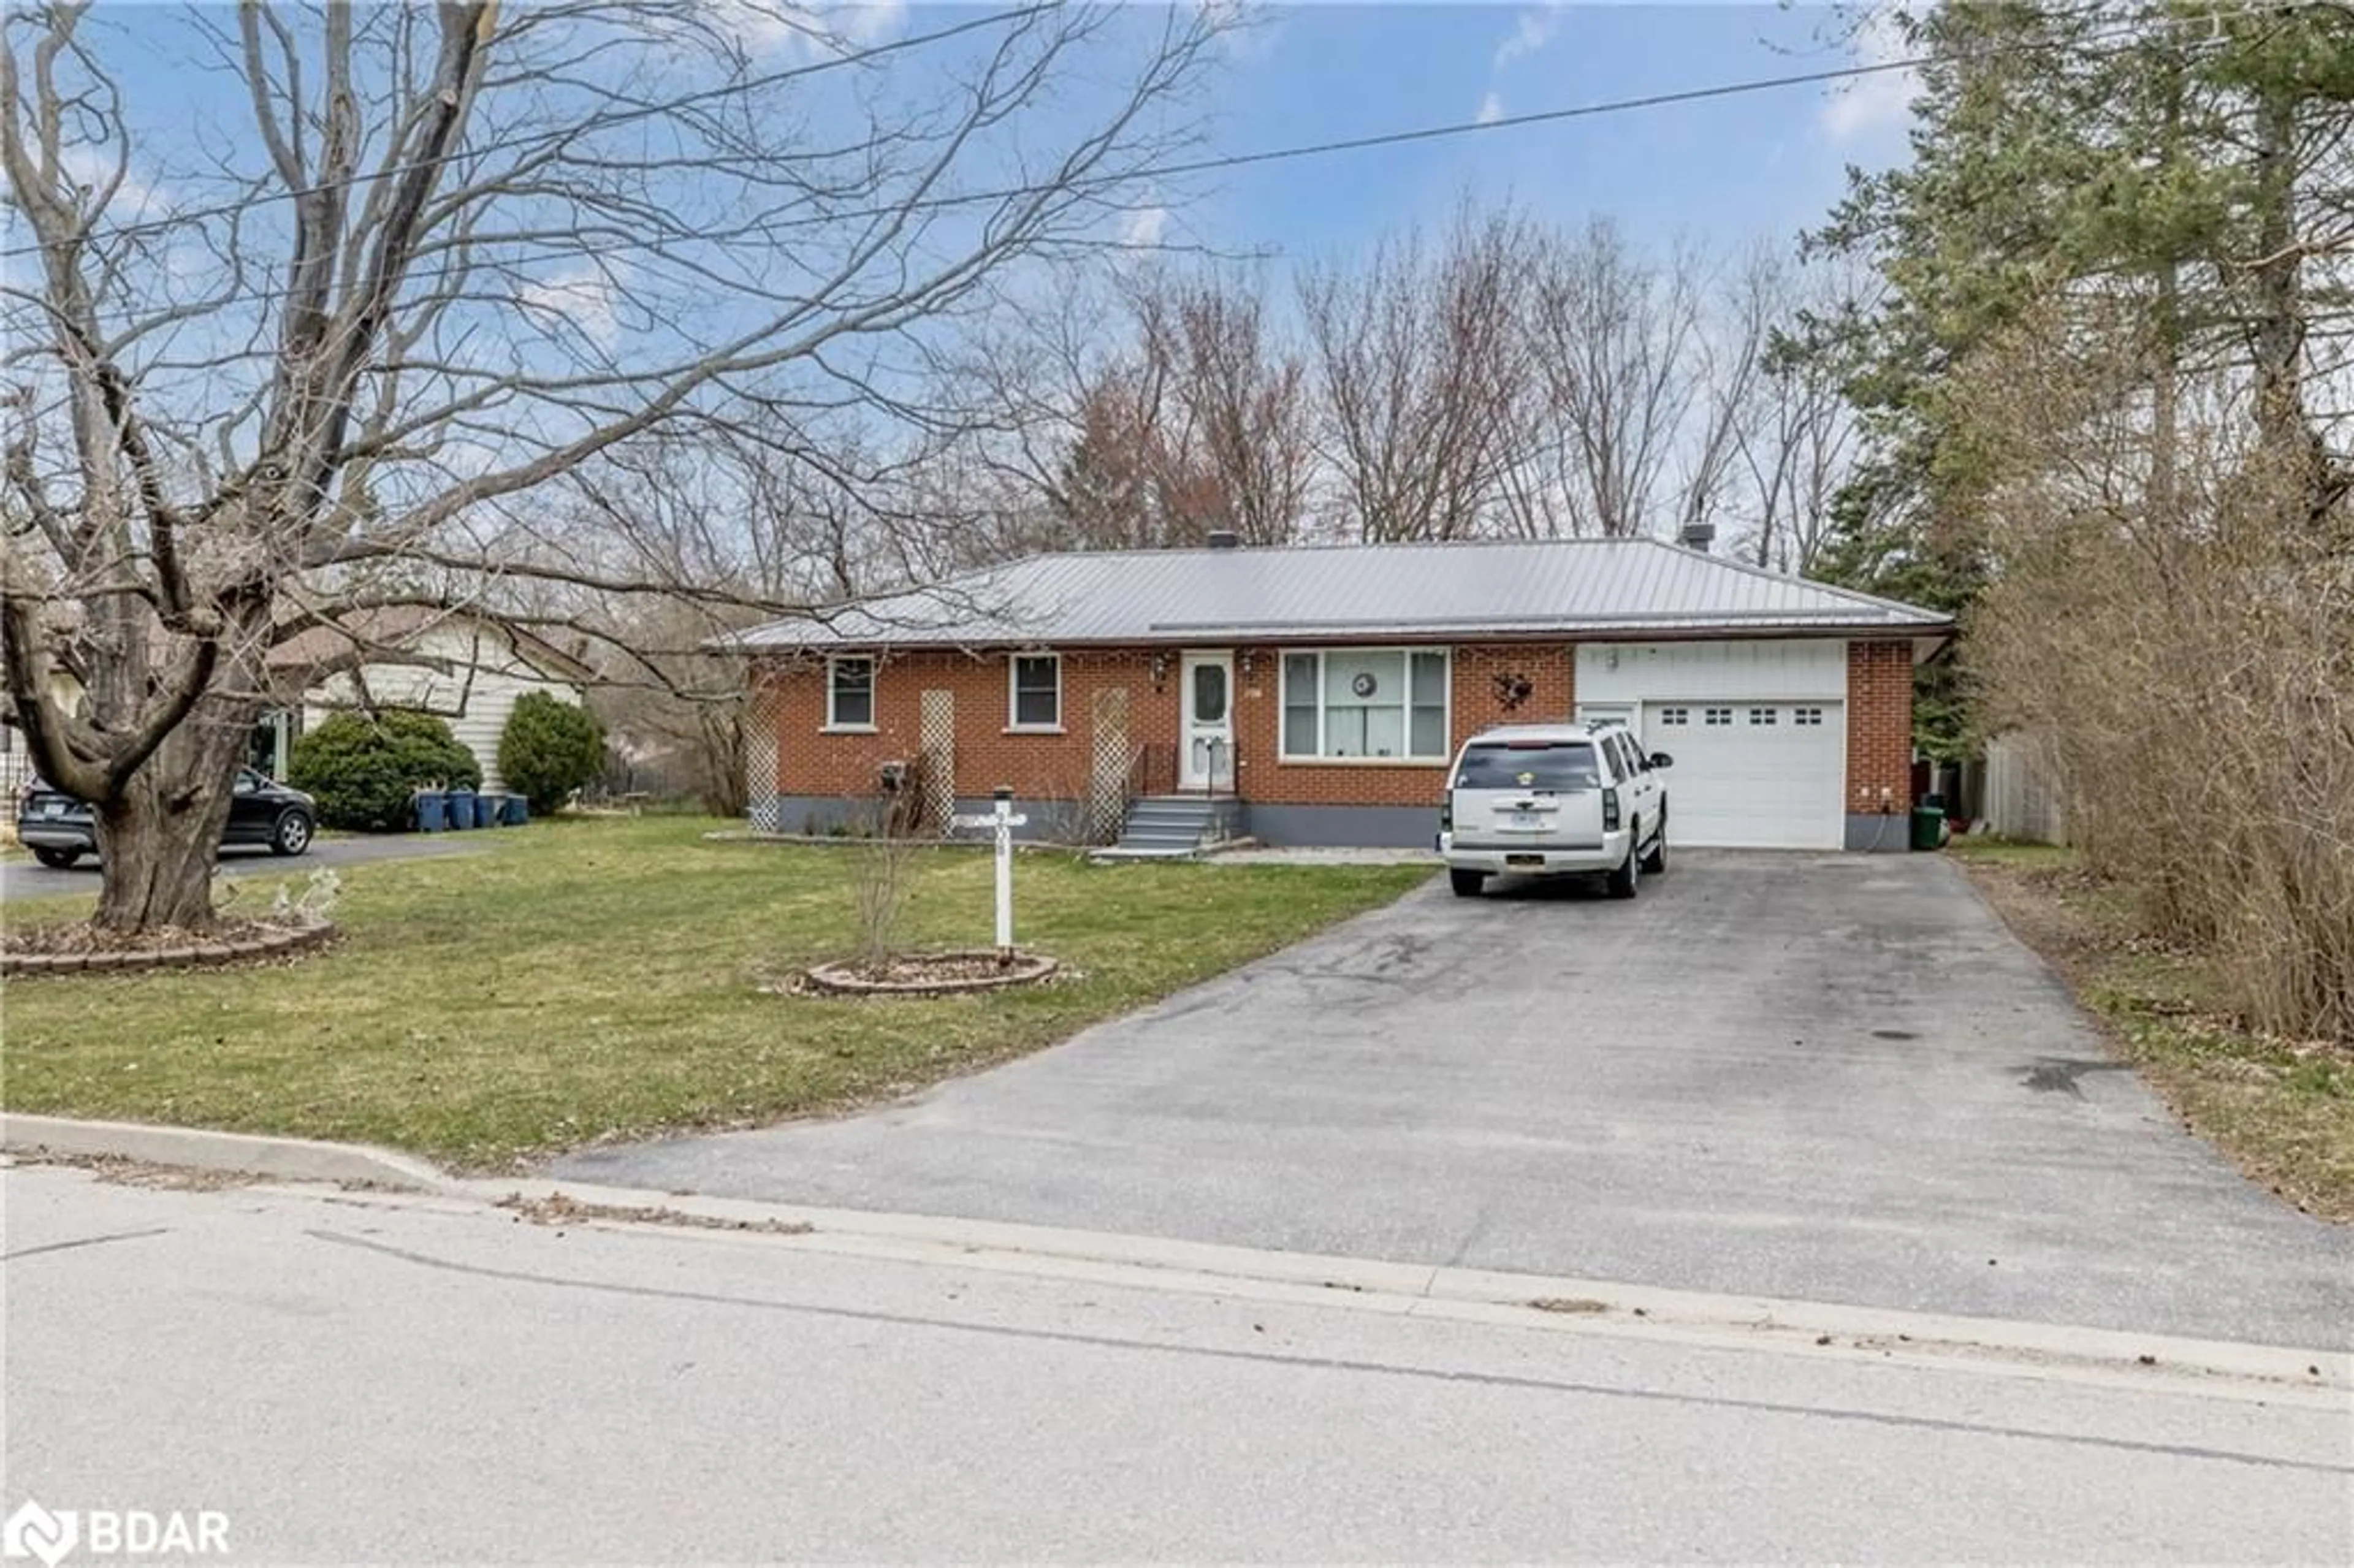 Frontside or backside of a home for 208 Bertha Ave, Barrie Ontario L4N 4A3